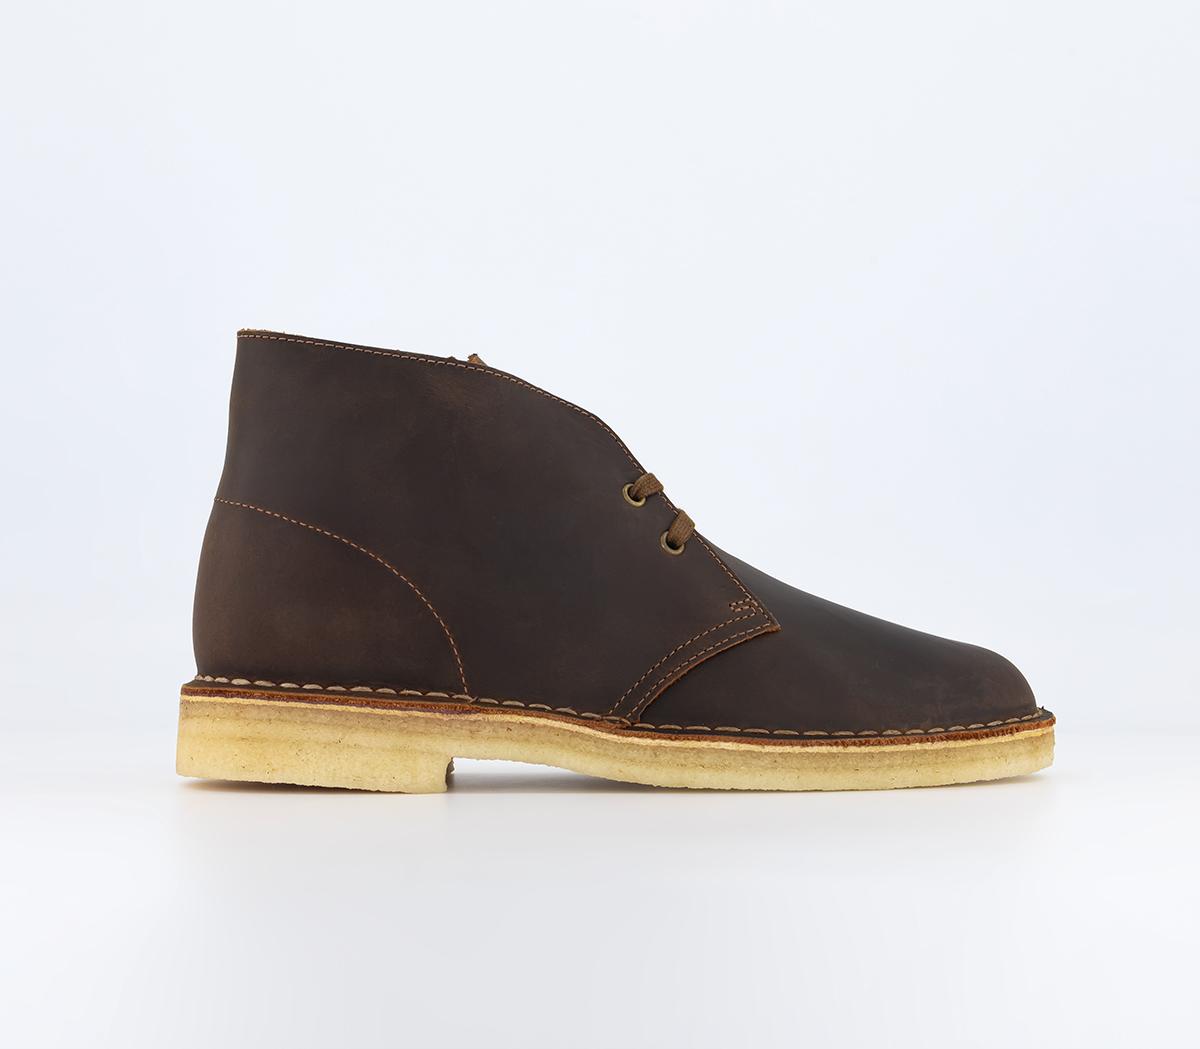 Mens Clarks Originals Clarks Originals Mens Desert Boots Beeswax